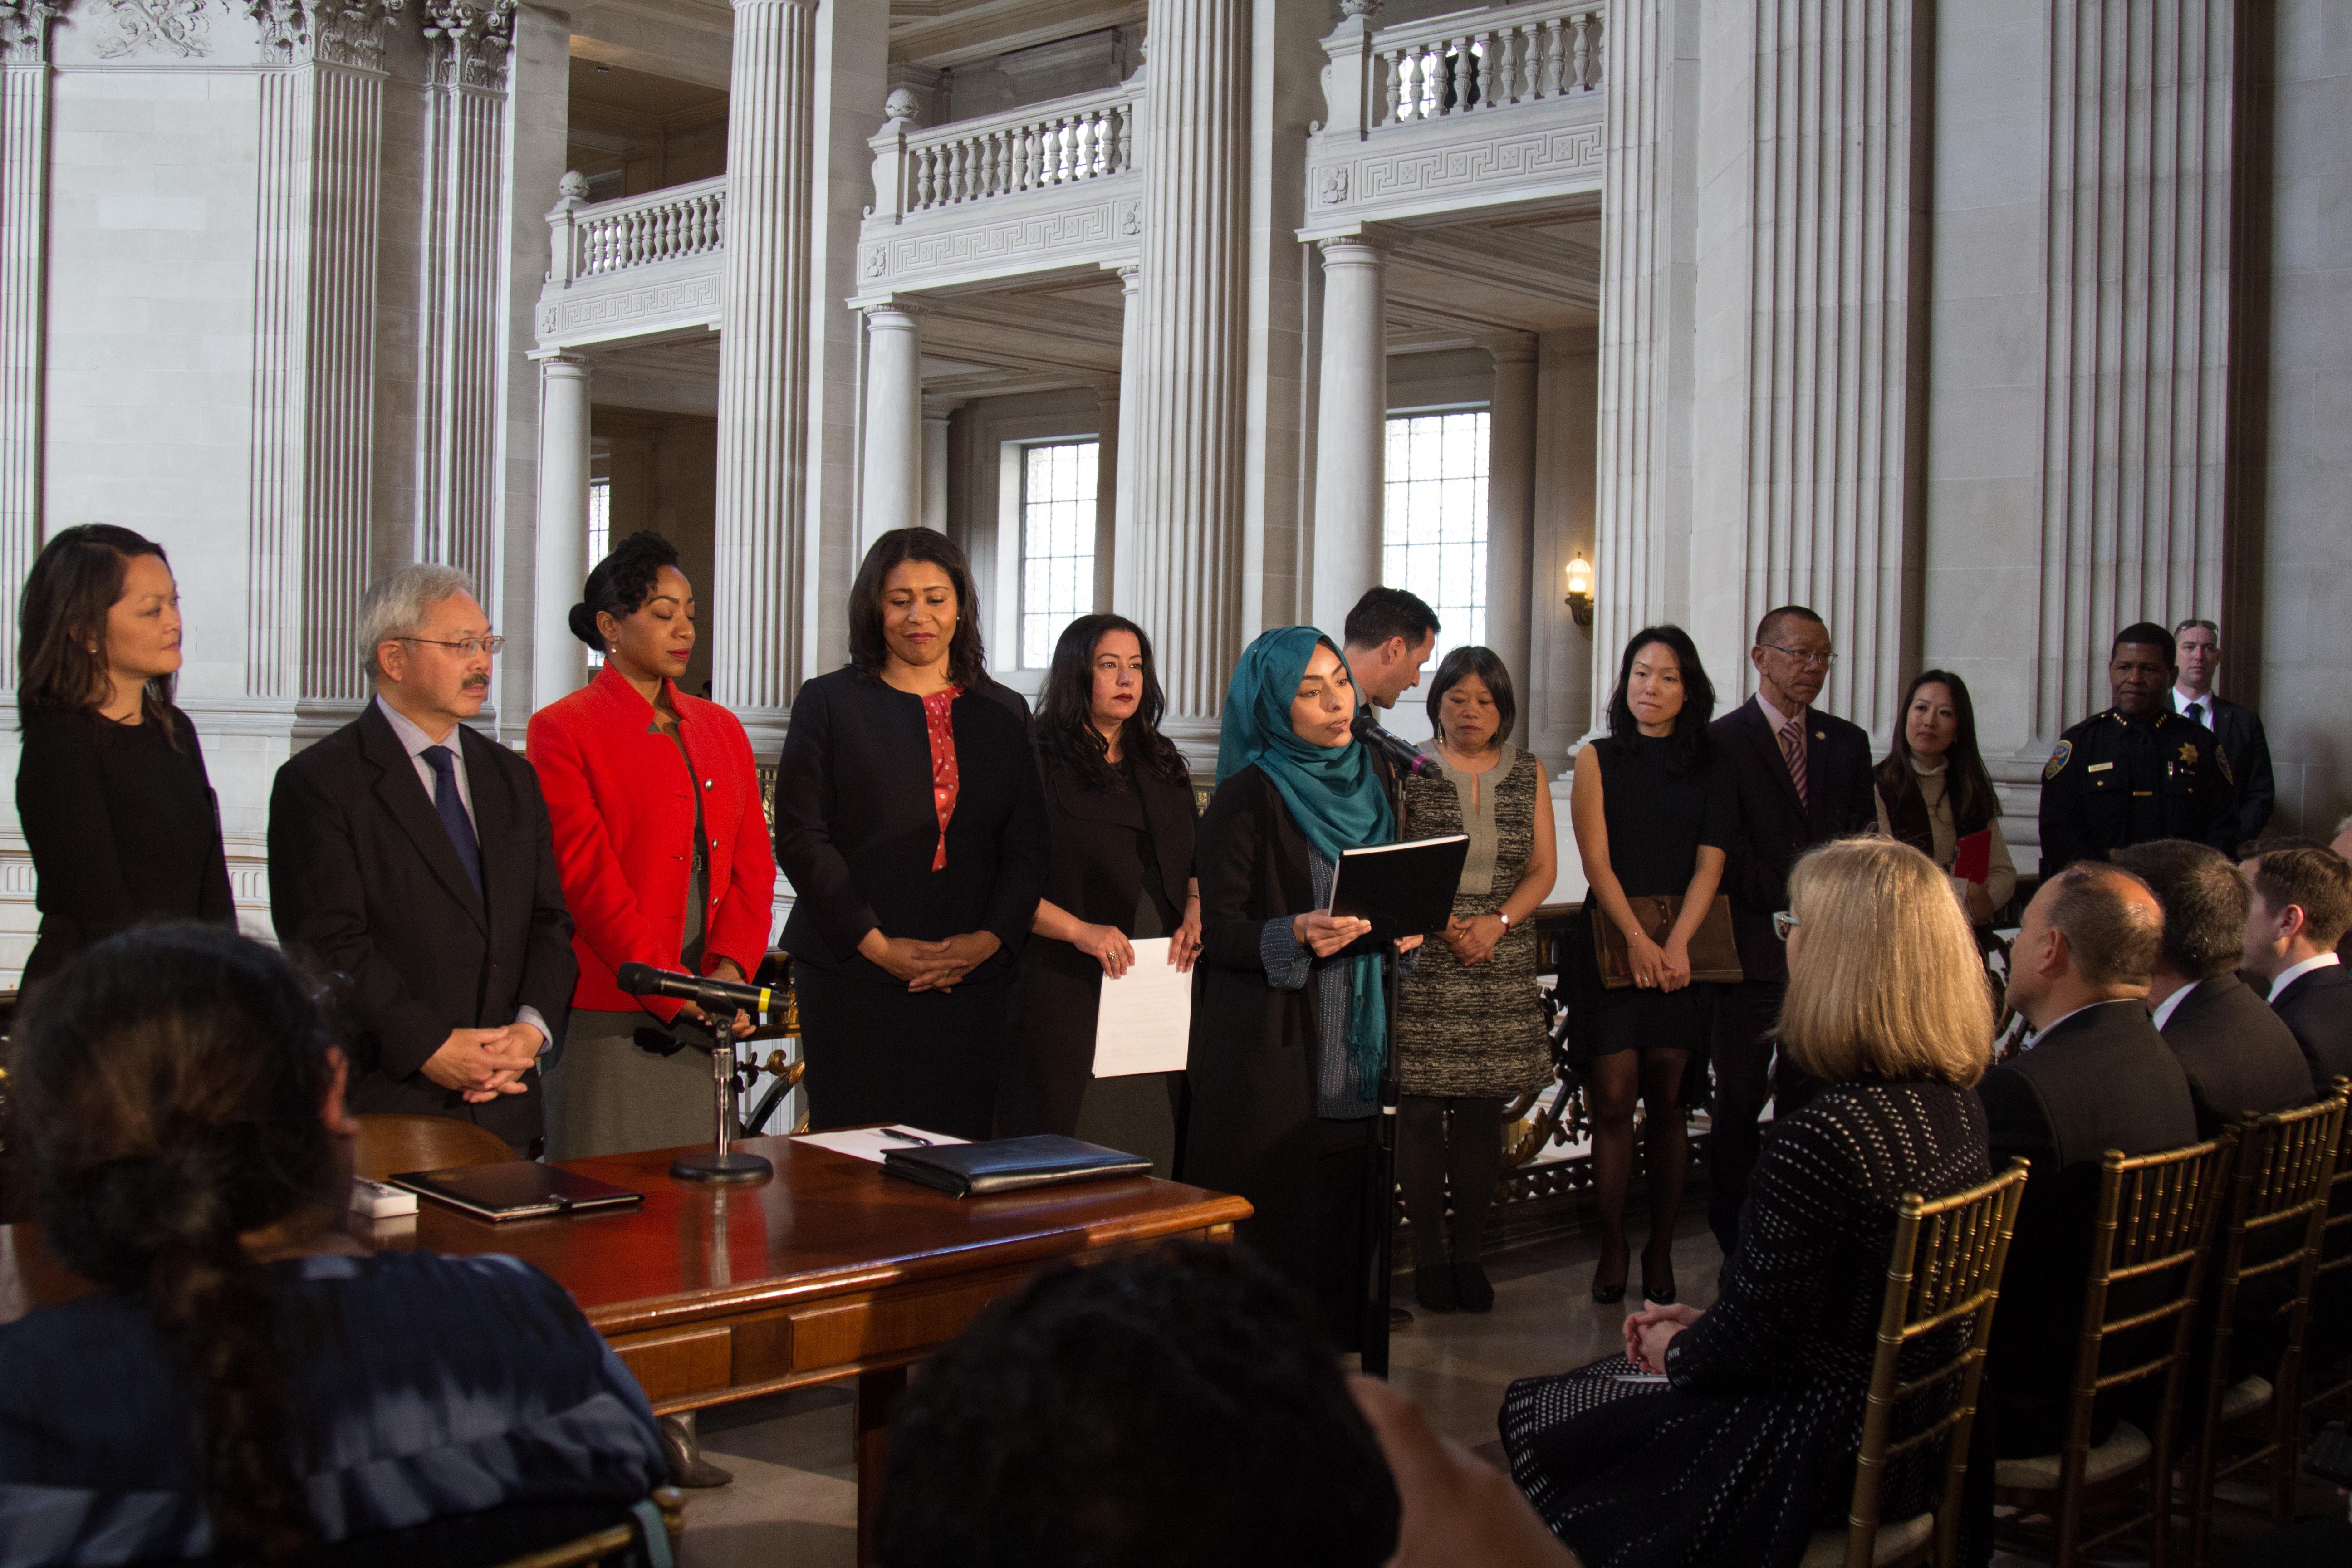 New San Francisco Ordinance Keeps the City From Cooperating With Any Religion-Based Registry